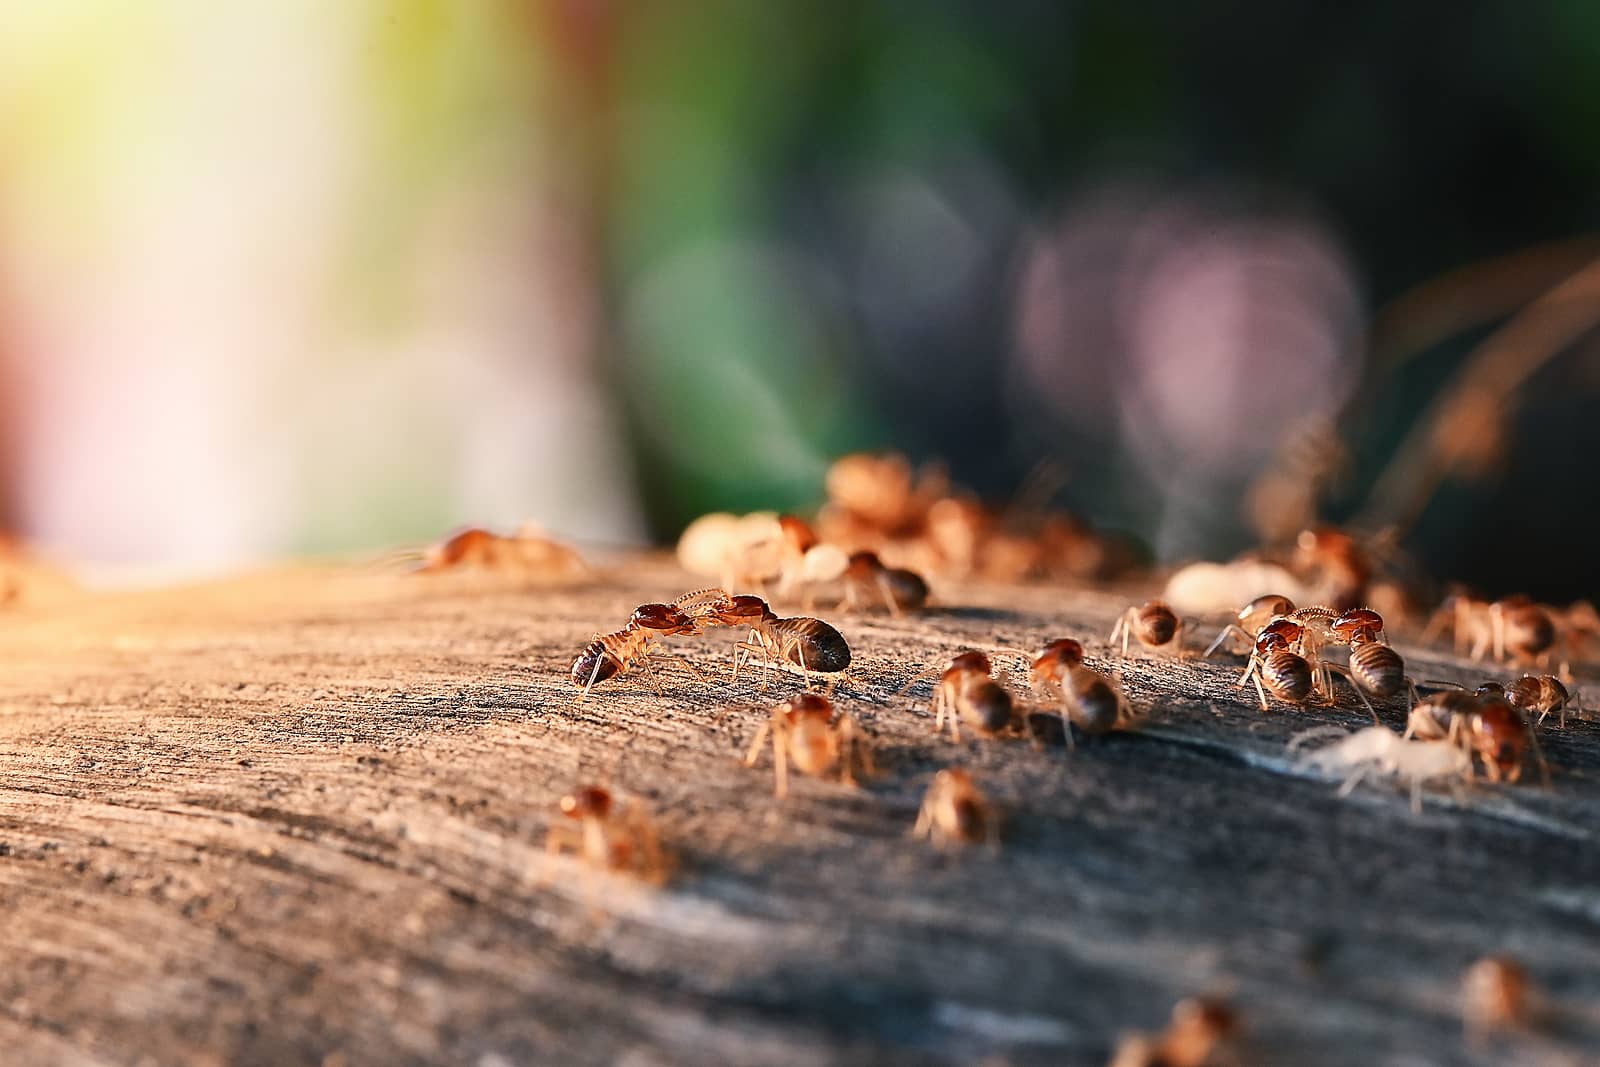 Does Homeowners Insurance Cover Termites